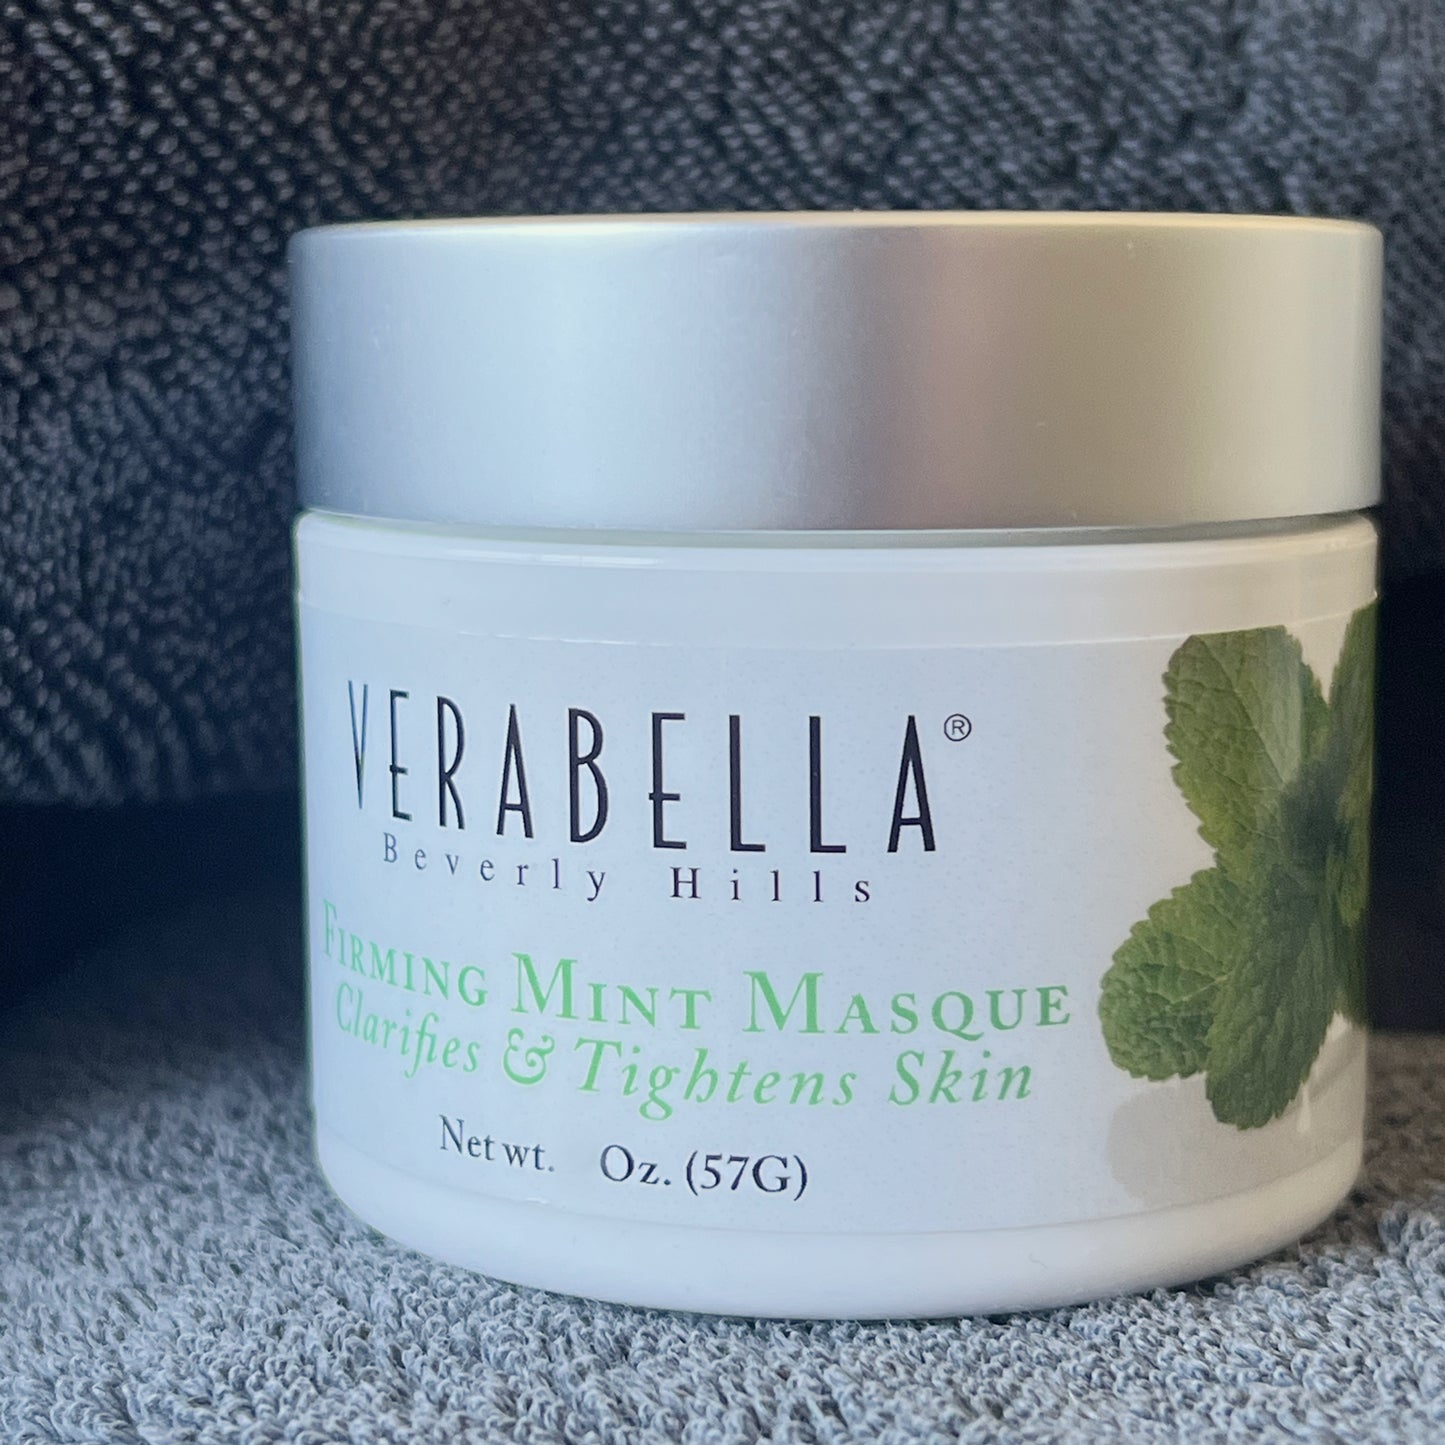 Container on Towel - Verabella Firming Mint Masque Mask